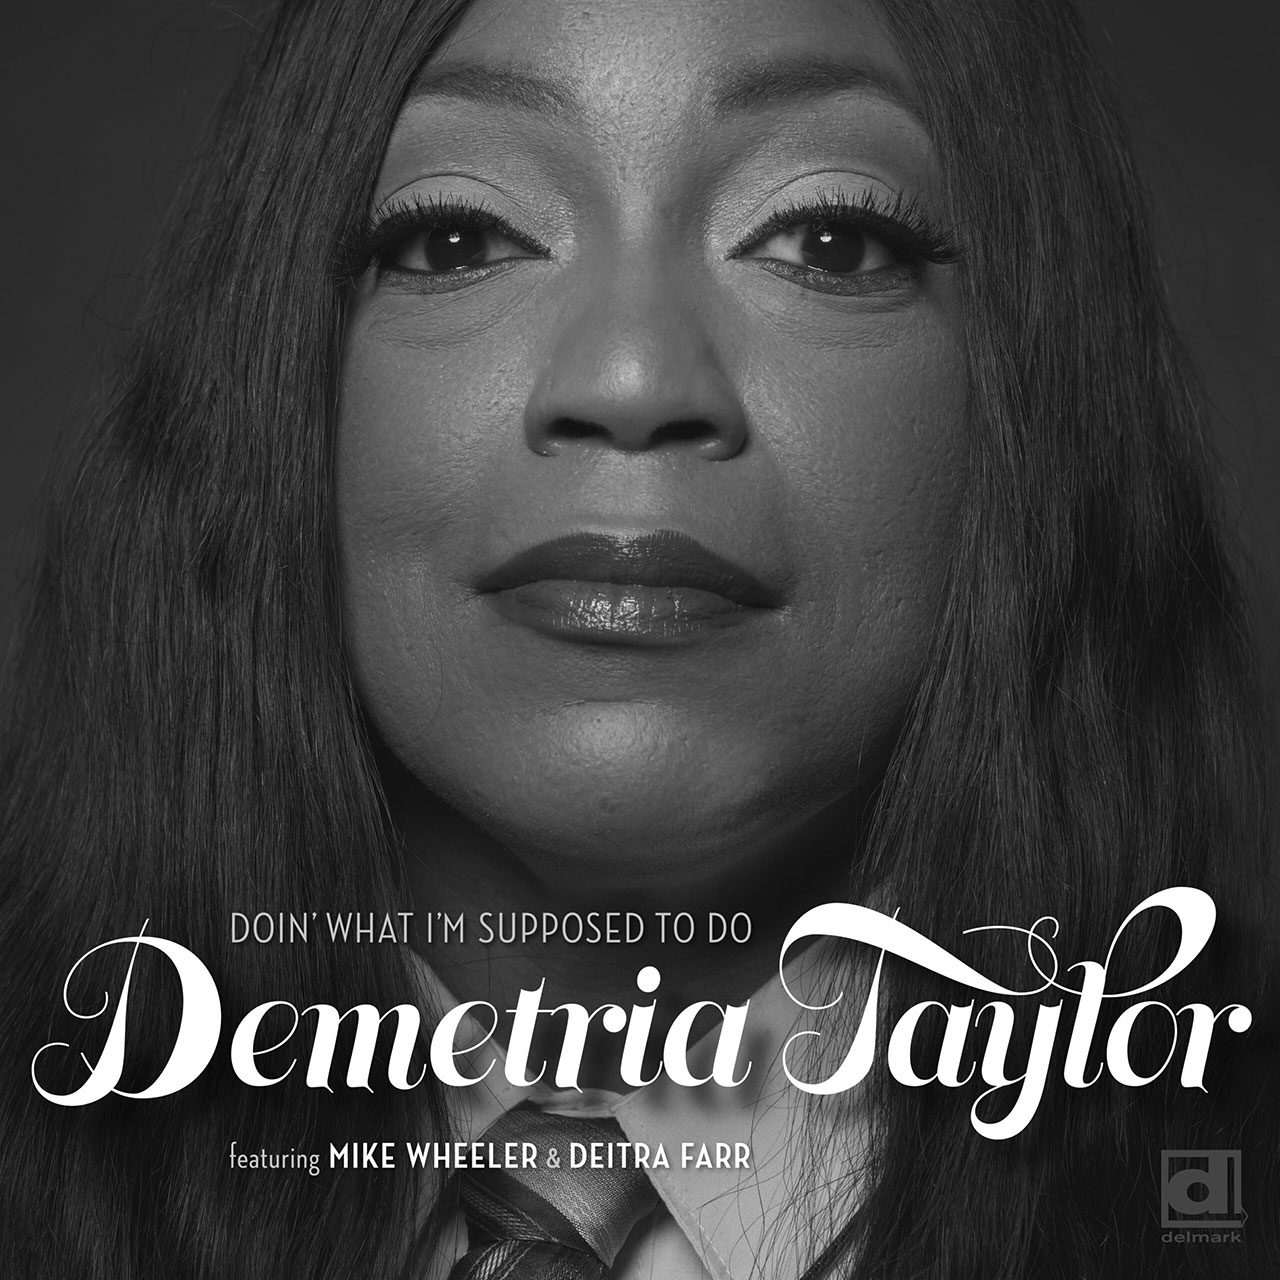 DEMETRIA TAYLOR: “Doin’ What I’m Supposed To Do” cover album